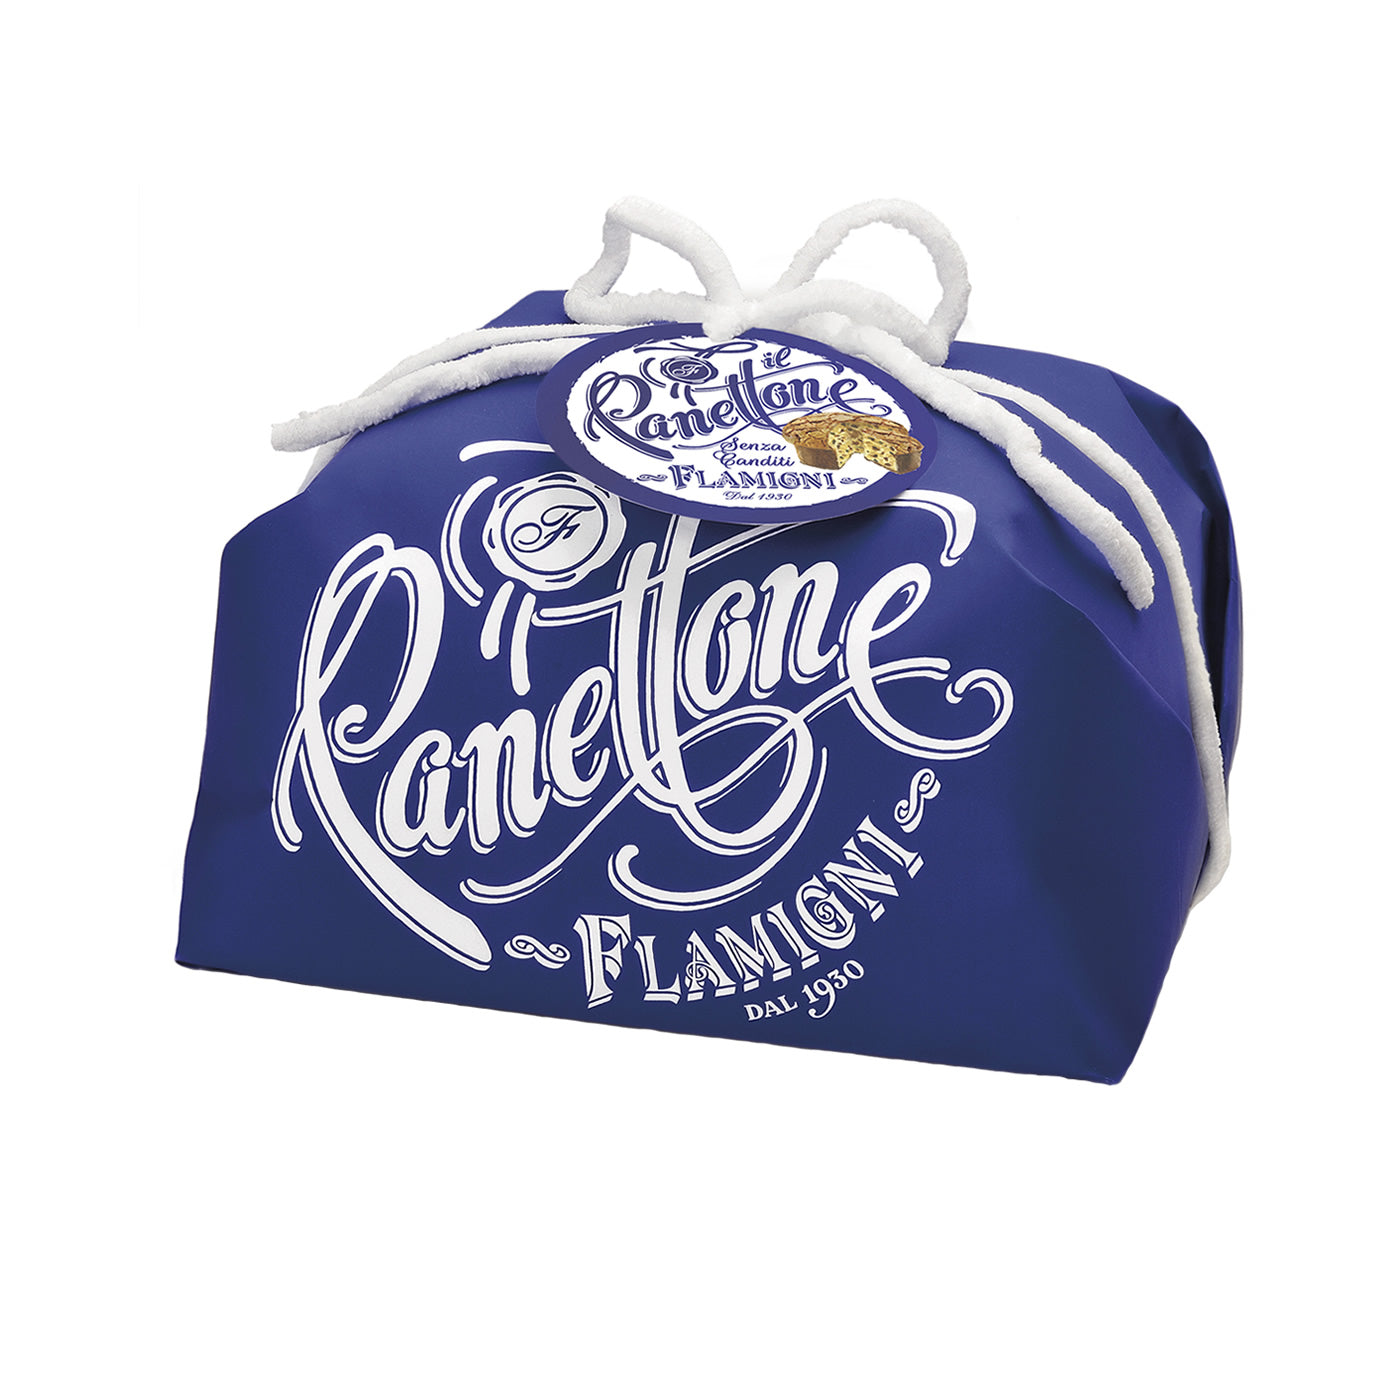 Panettone without Candied Fruit with Raisins